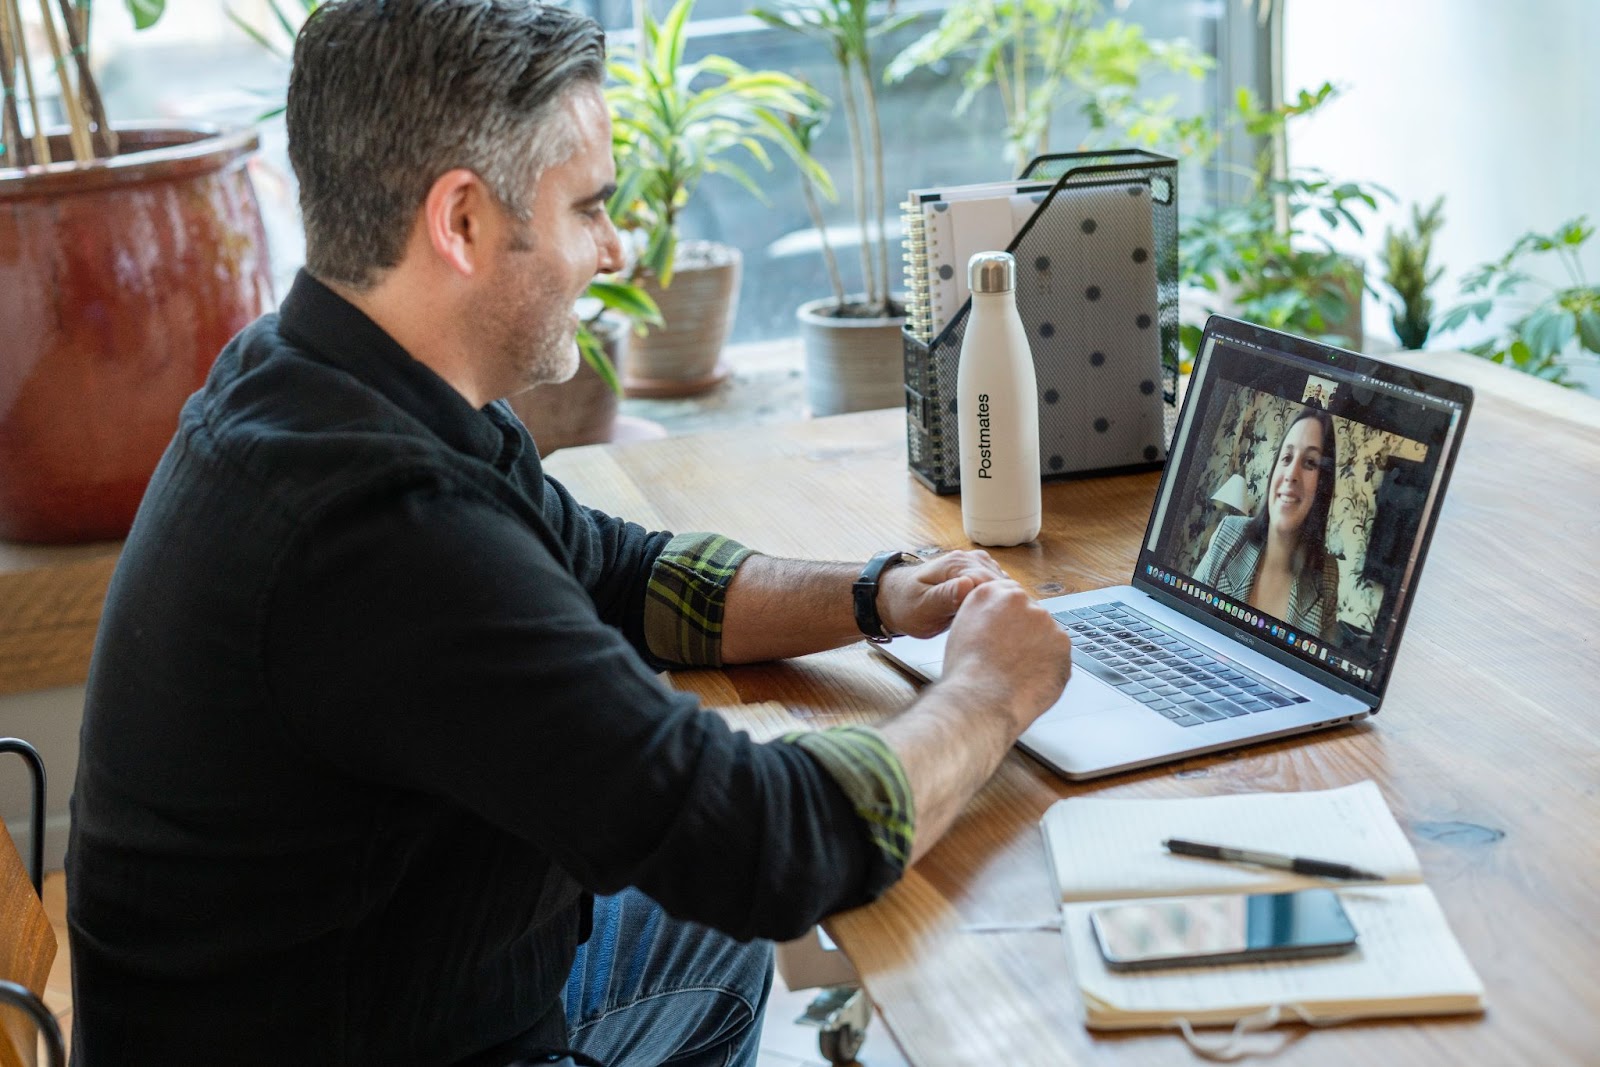 A picture of a man conducting an interview with a woman via video conference.